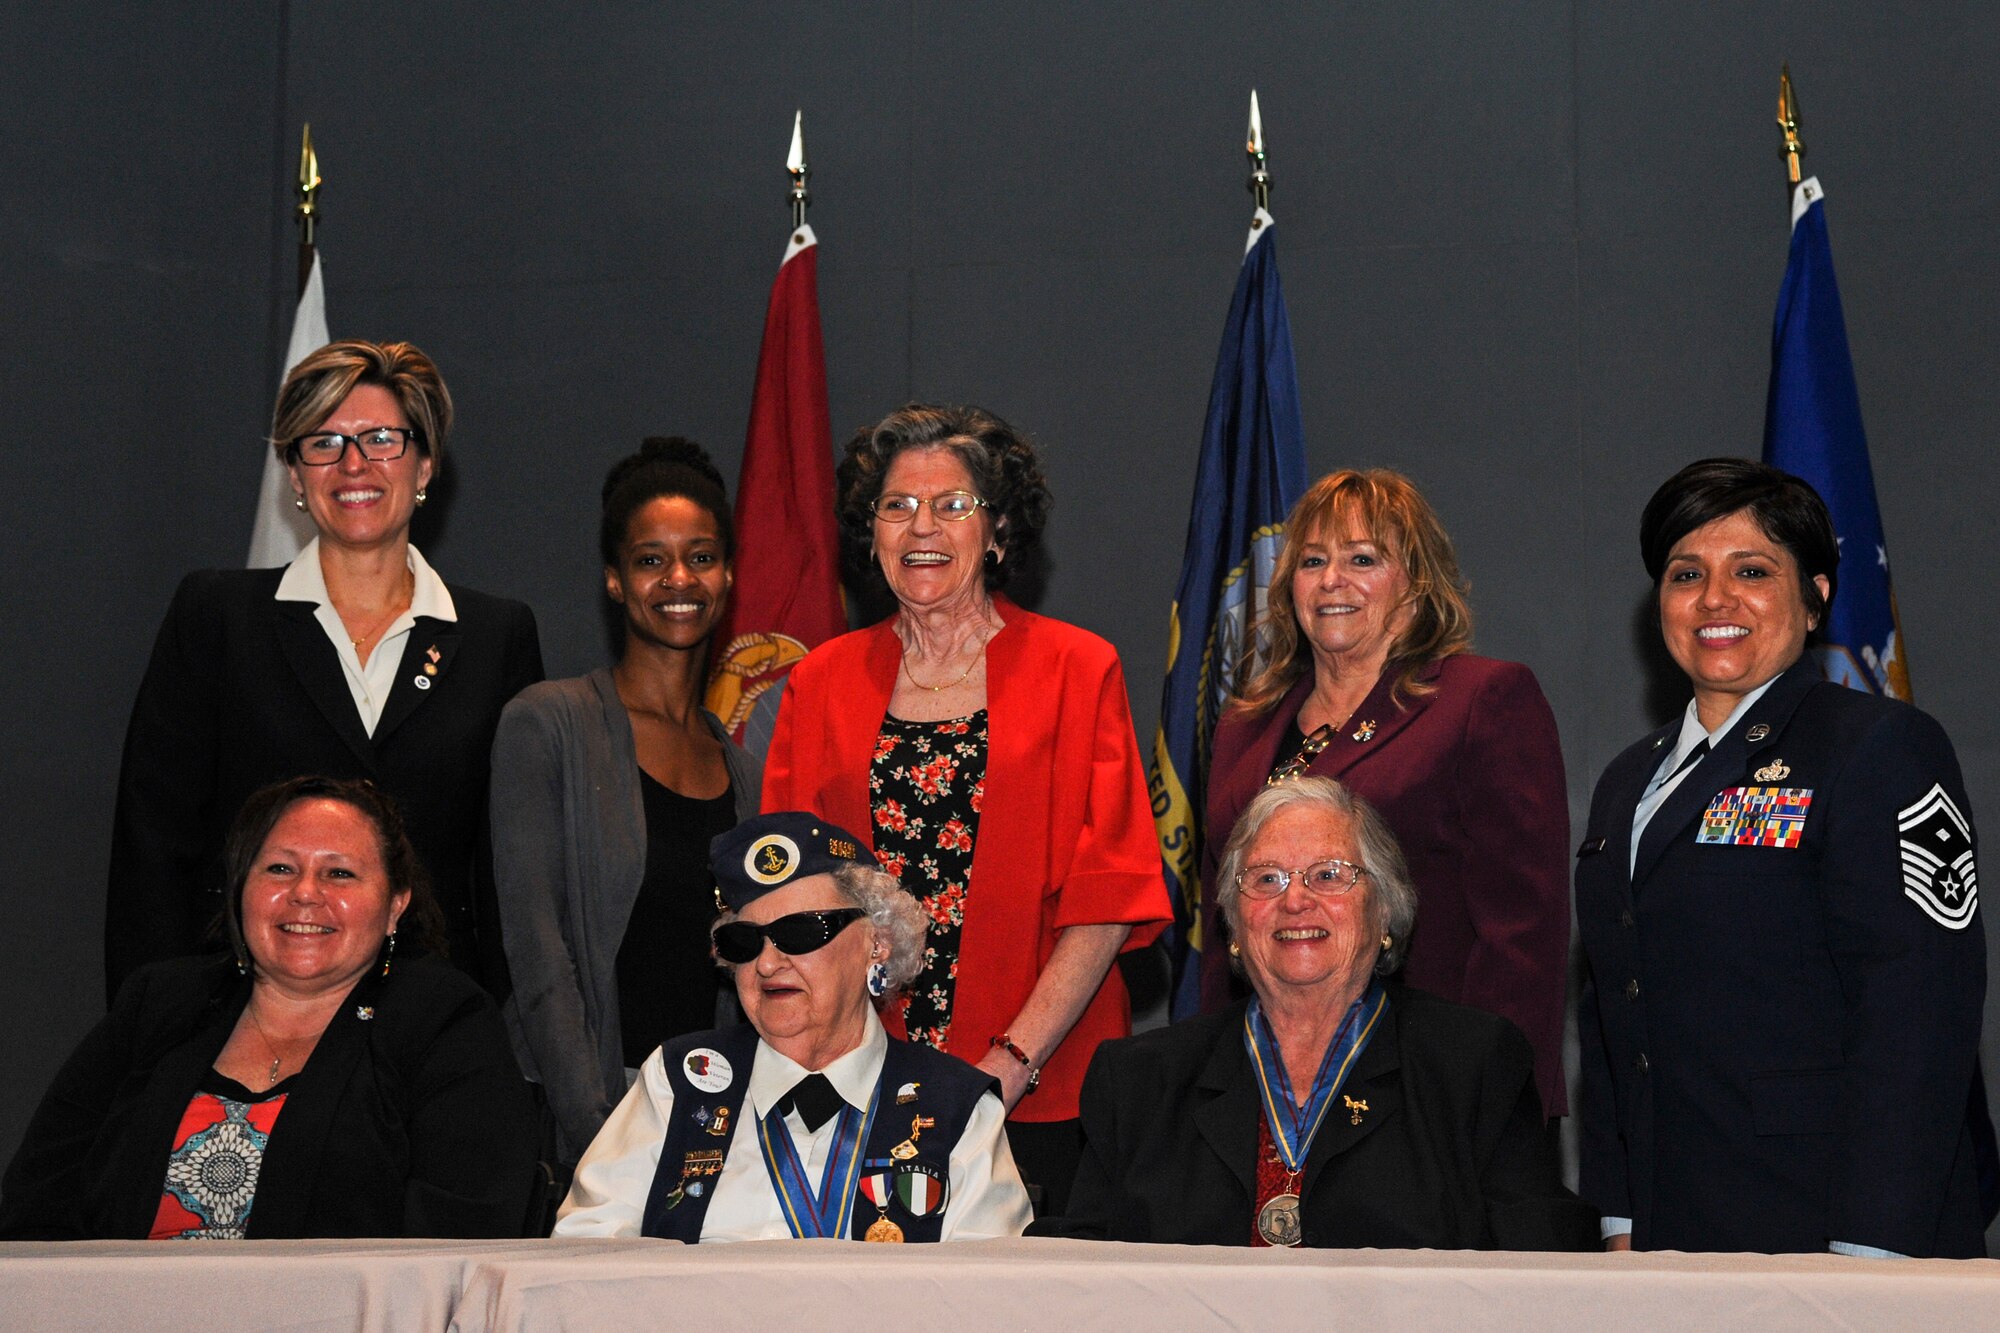 U.S. Air Force Senior Master Sgt. Tamara Gonzales, a First Sergeant with the 121st Air Refueling Wing, Ohio National Guard, participated in a Veterans panel discussion for women Mar. 10, 2017 at the Ohio History Center in Columbus, Ohio. The discussion was sponsored by the Ohio Department of Veterans Services in honor of Women's History Month. (U.S. Air National Guard photo by Senior Airman Wendy Kuhn)